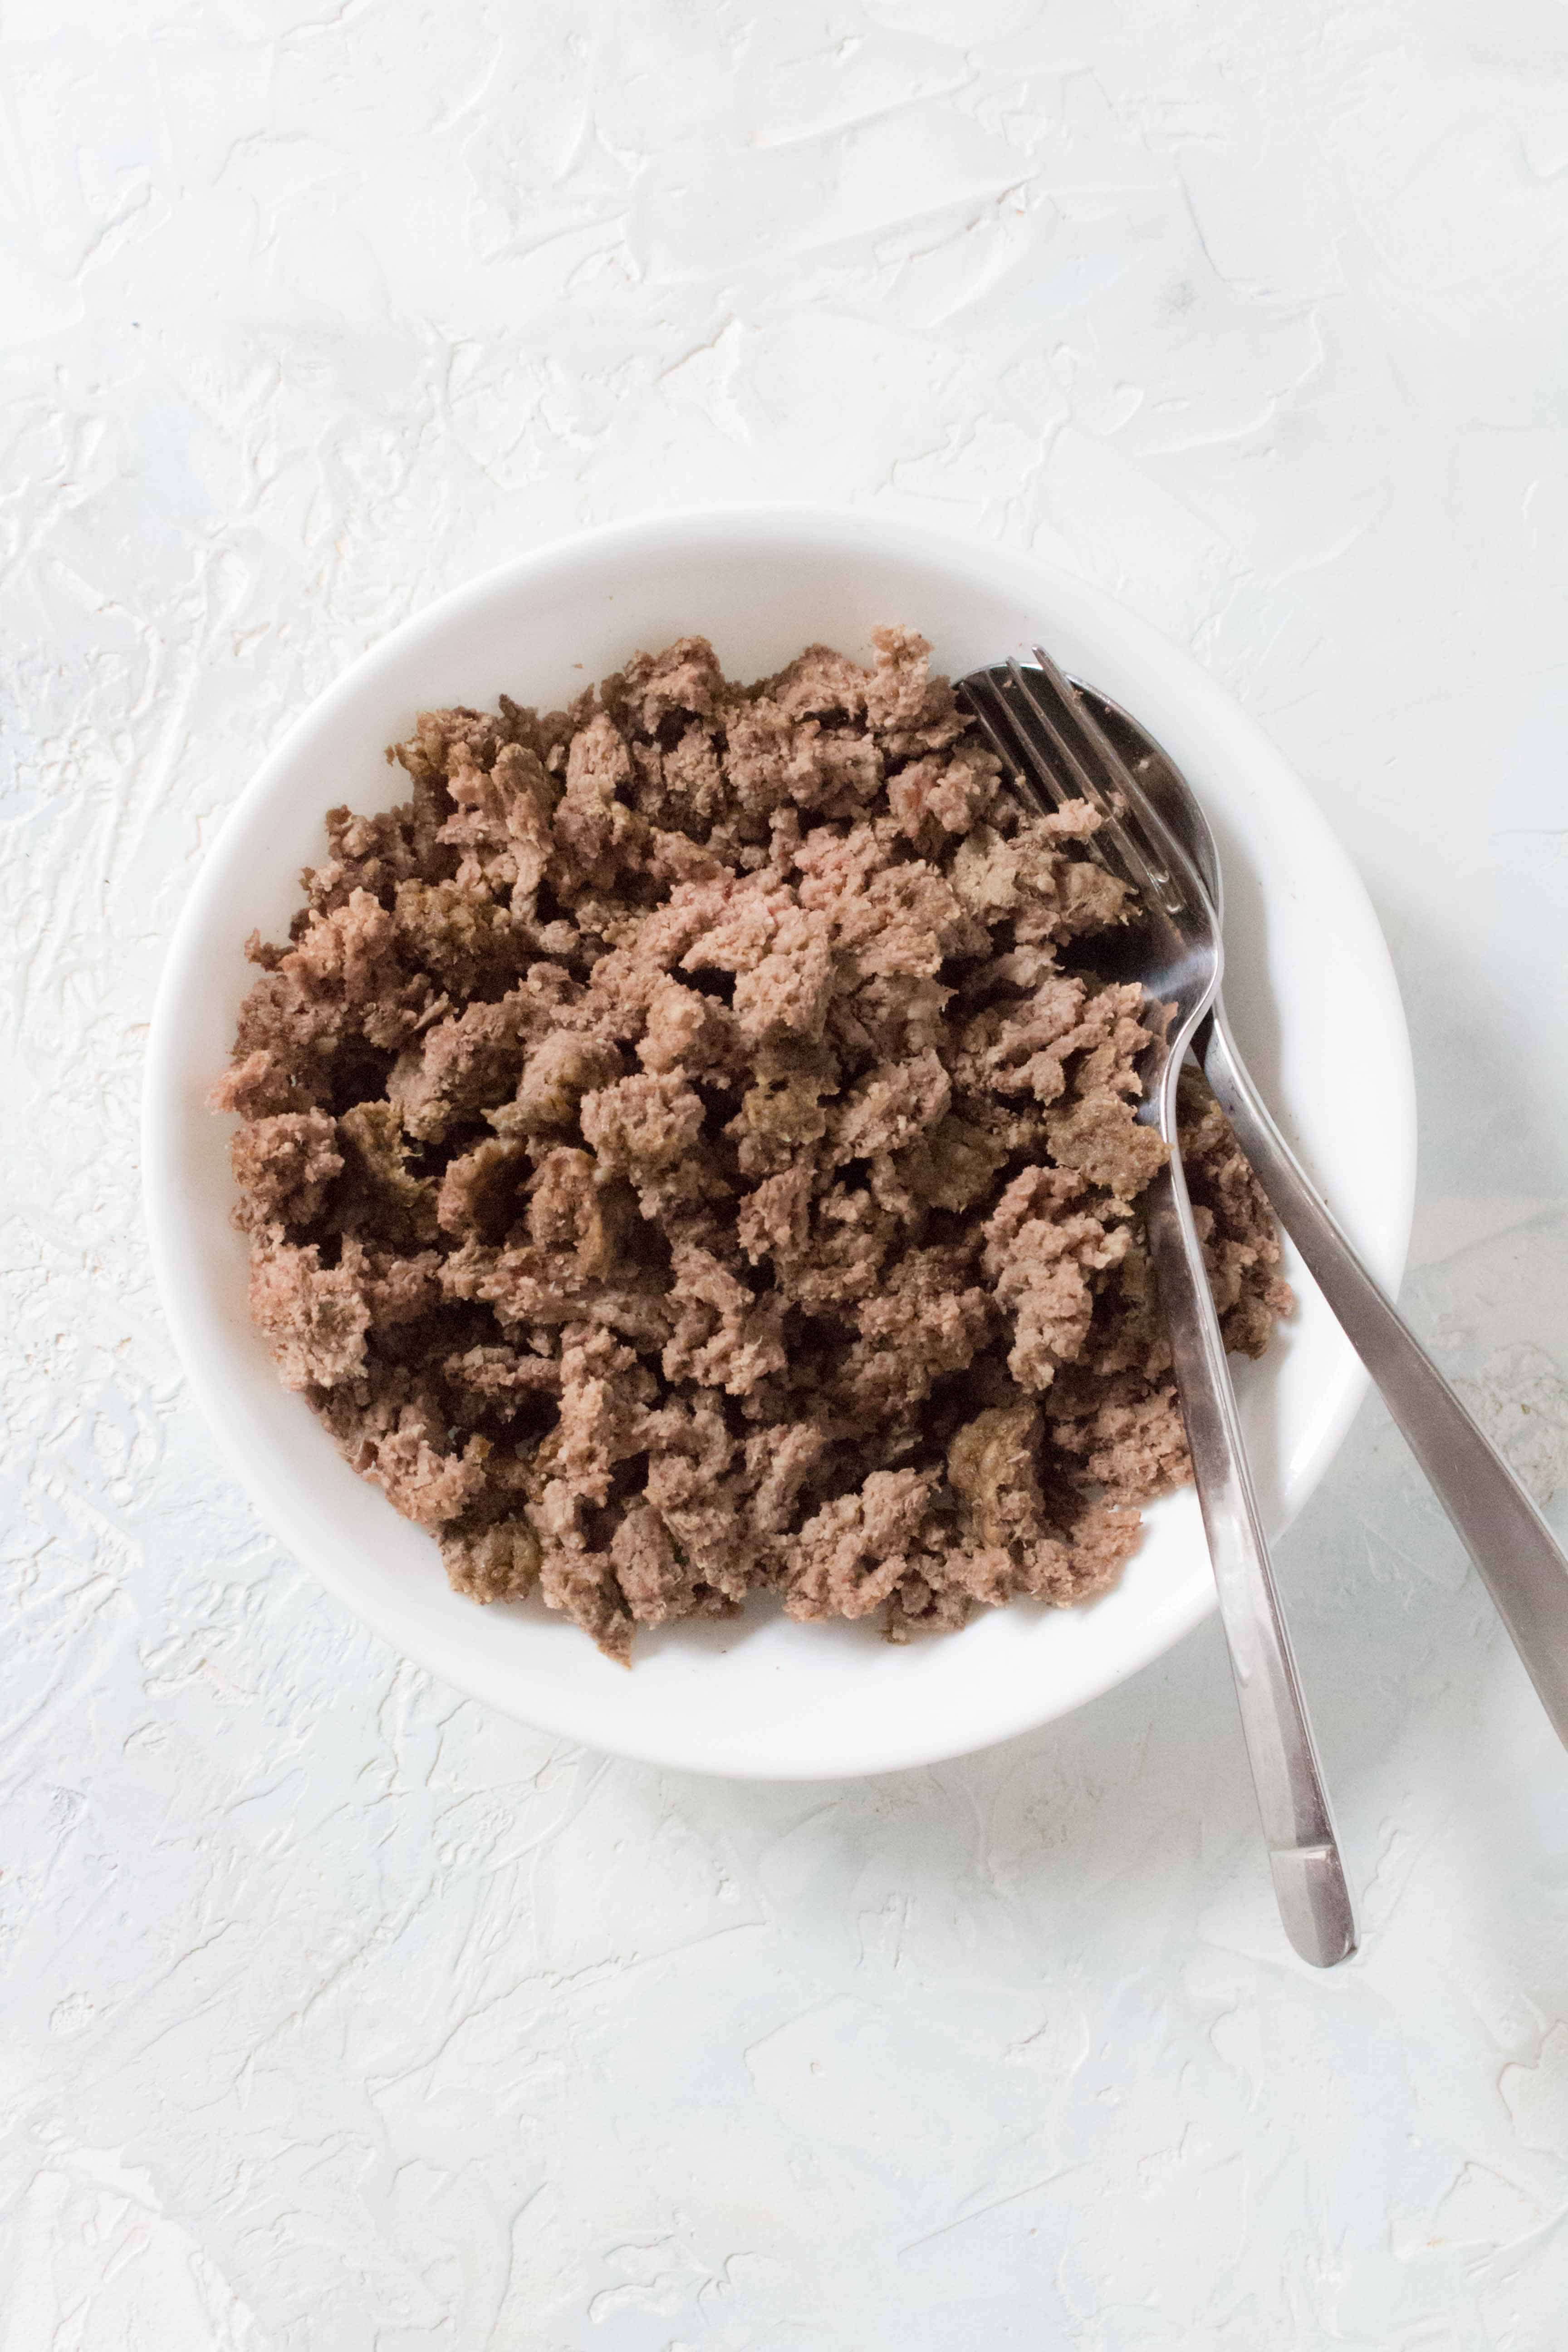 Did you forget to thaw your ground beef? Not to worry! Here's how you can use your Instant Pot to cook your frozen ground beef.